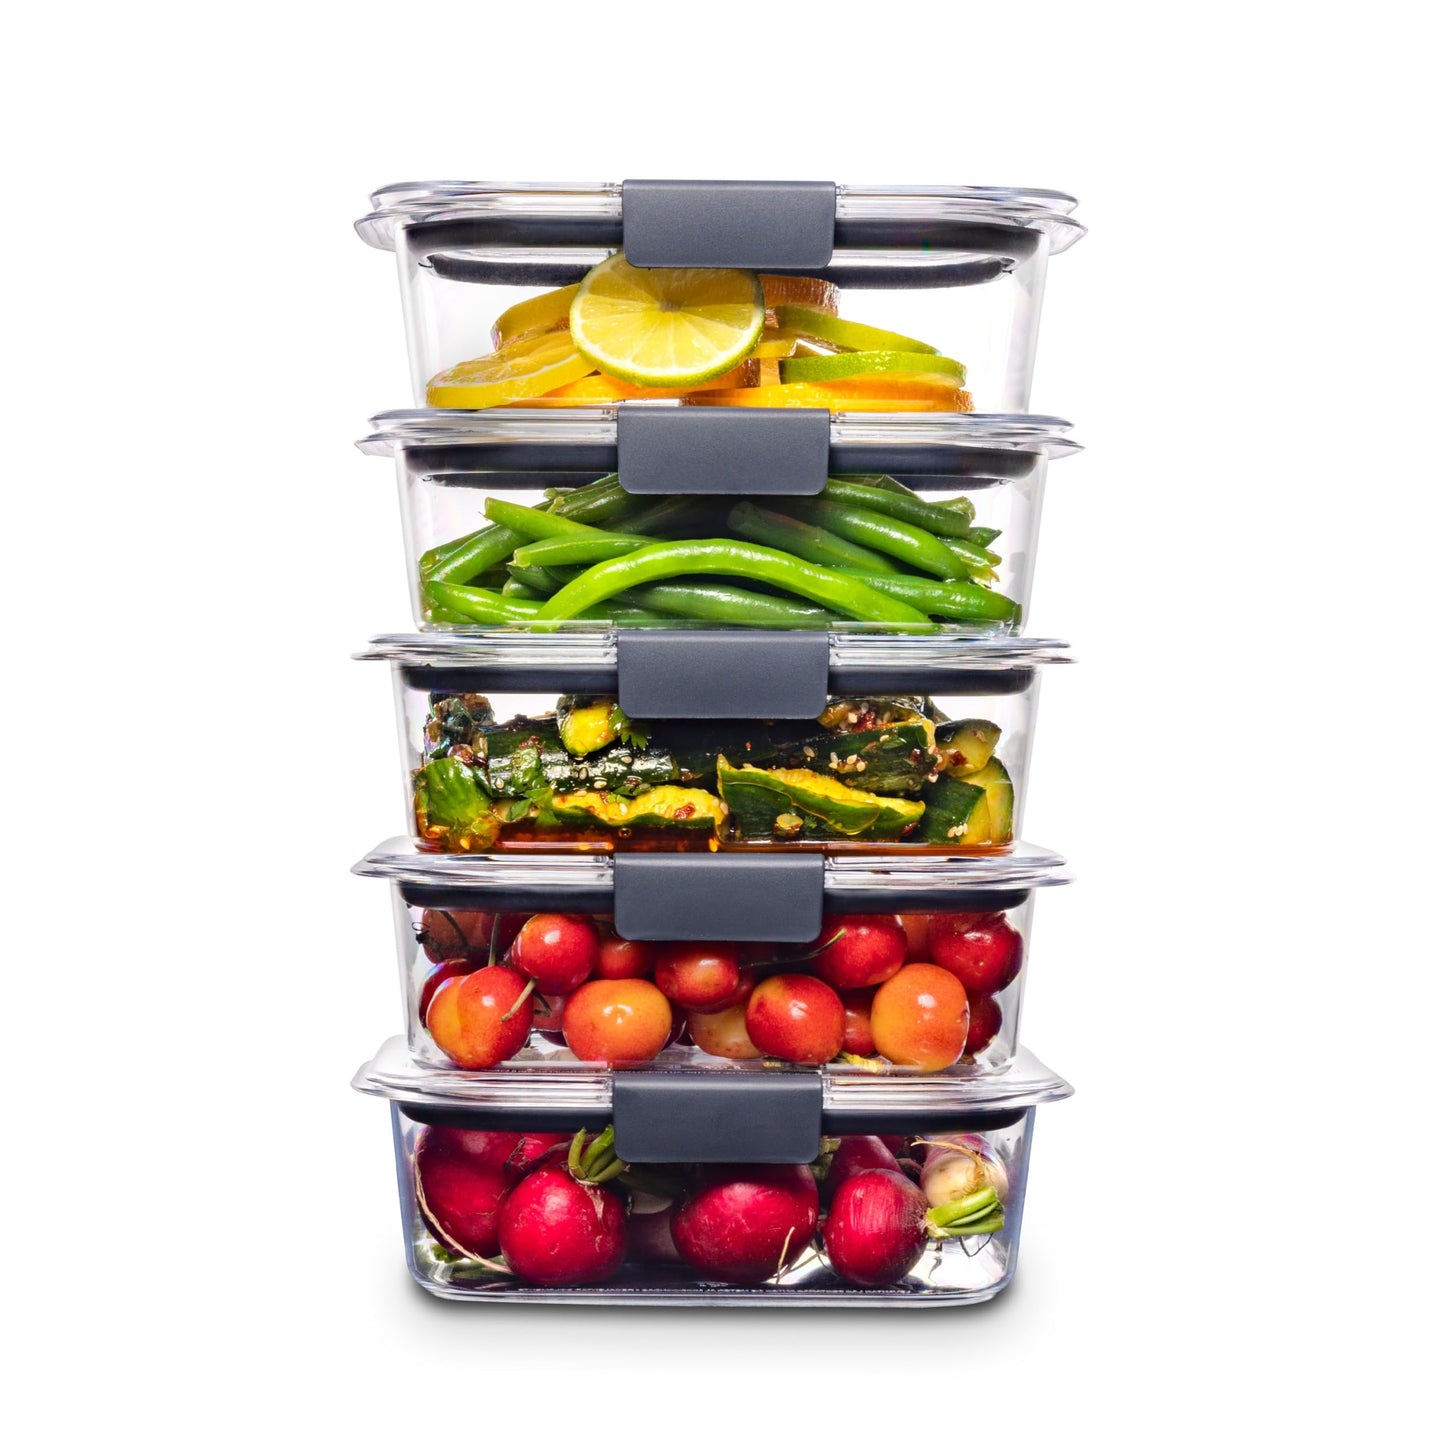 Rubbermaid Brilliance BPA Free Food Storage Containers with Lids, Airtight, for Lunch, Meal Prep, and Leftovers